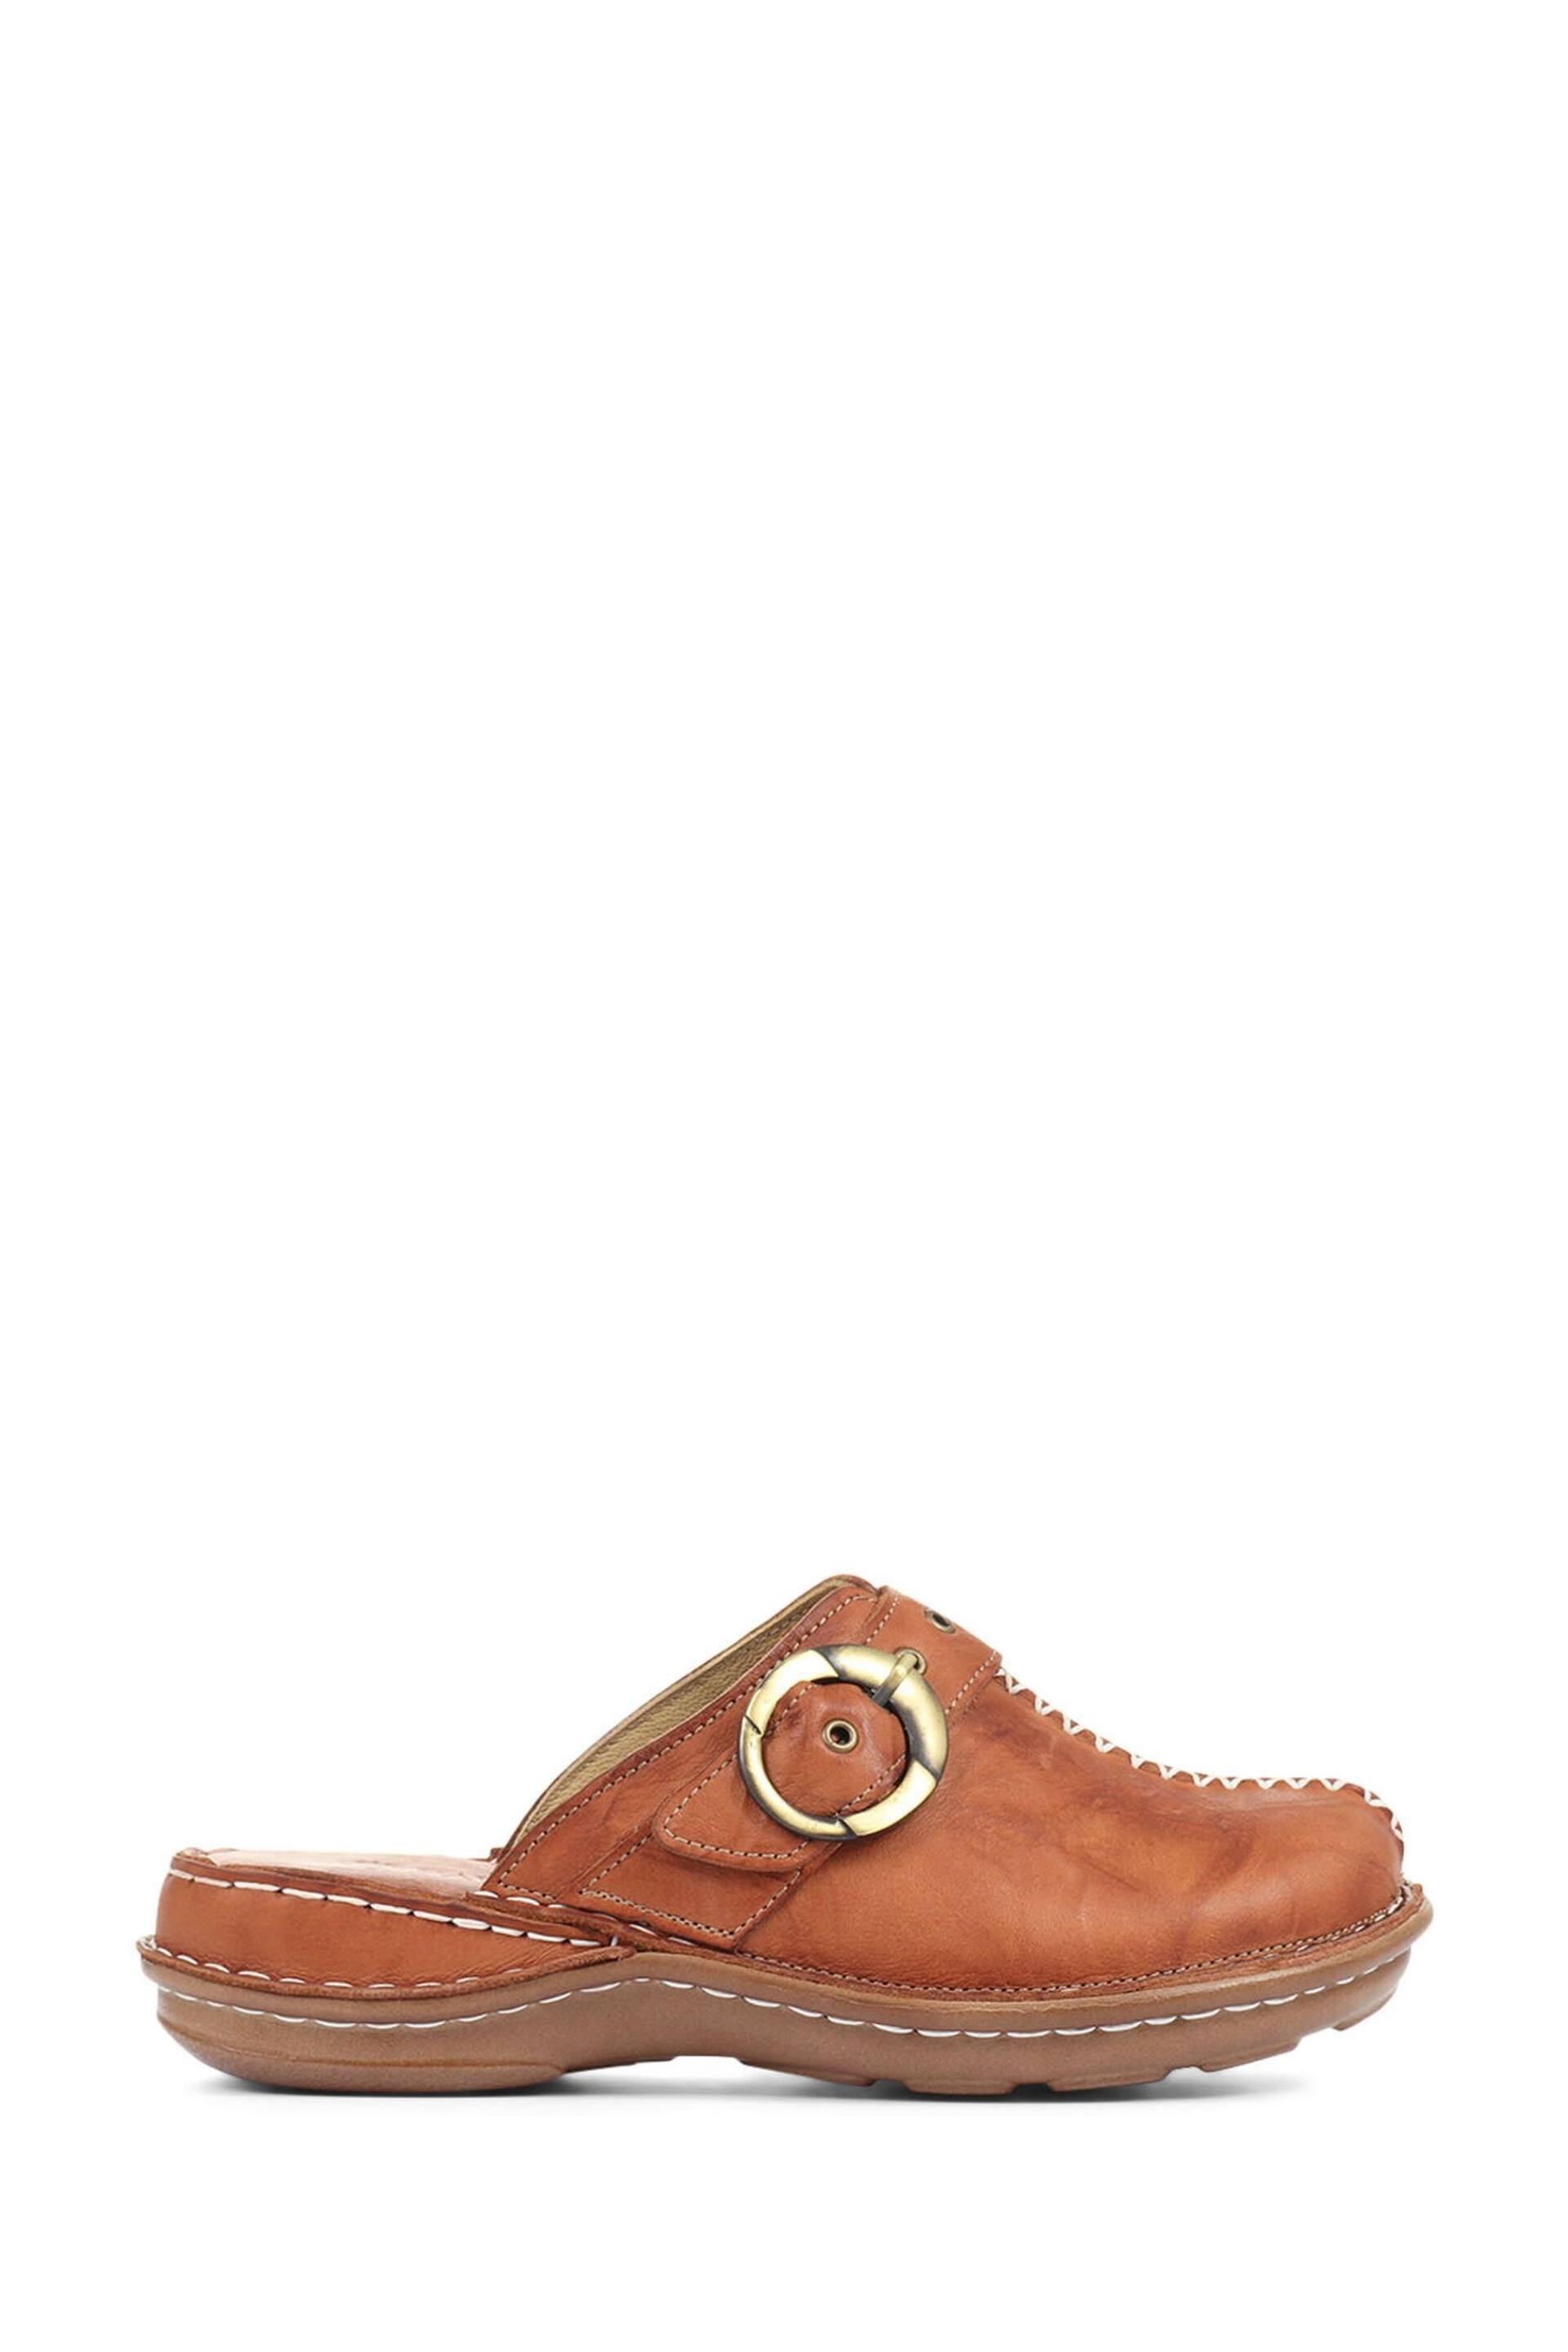 Pavers Tan Ladies Lightweight Leather Clogs - Image 1 of 5